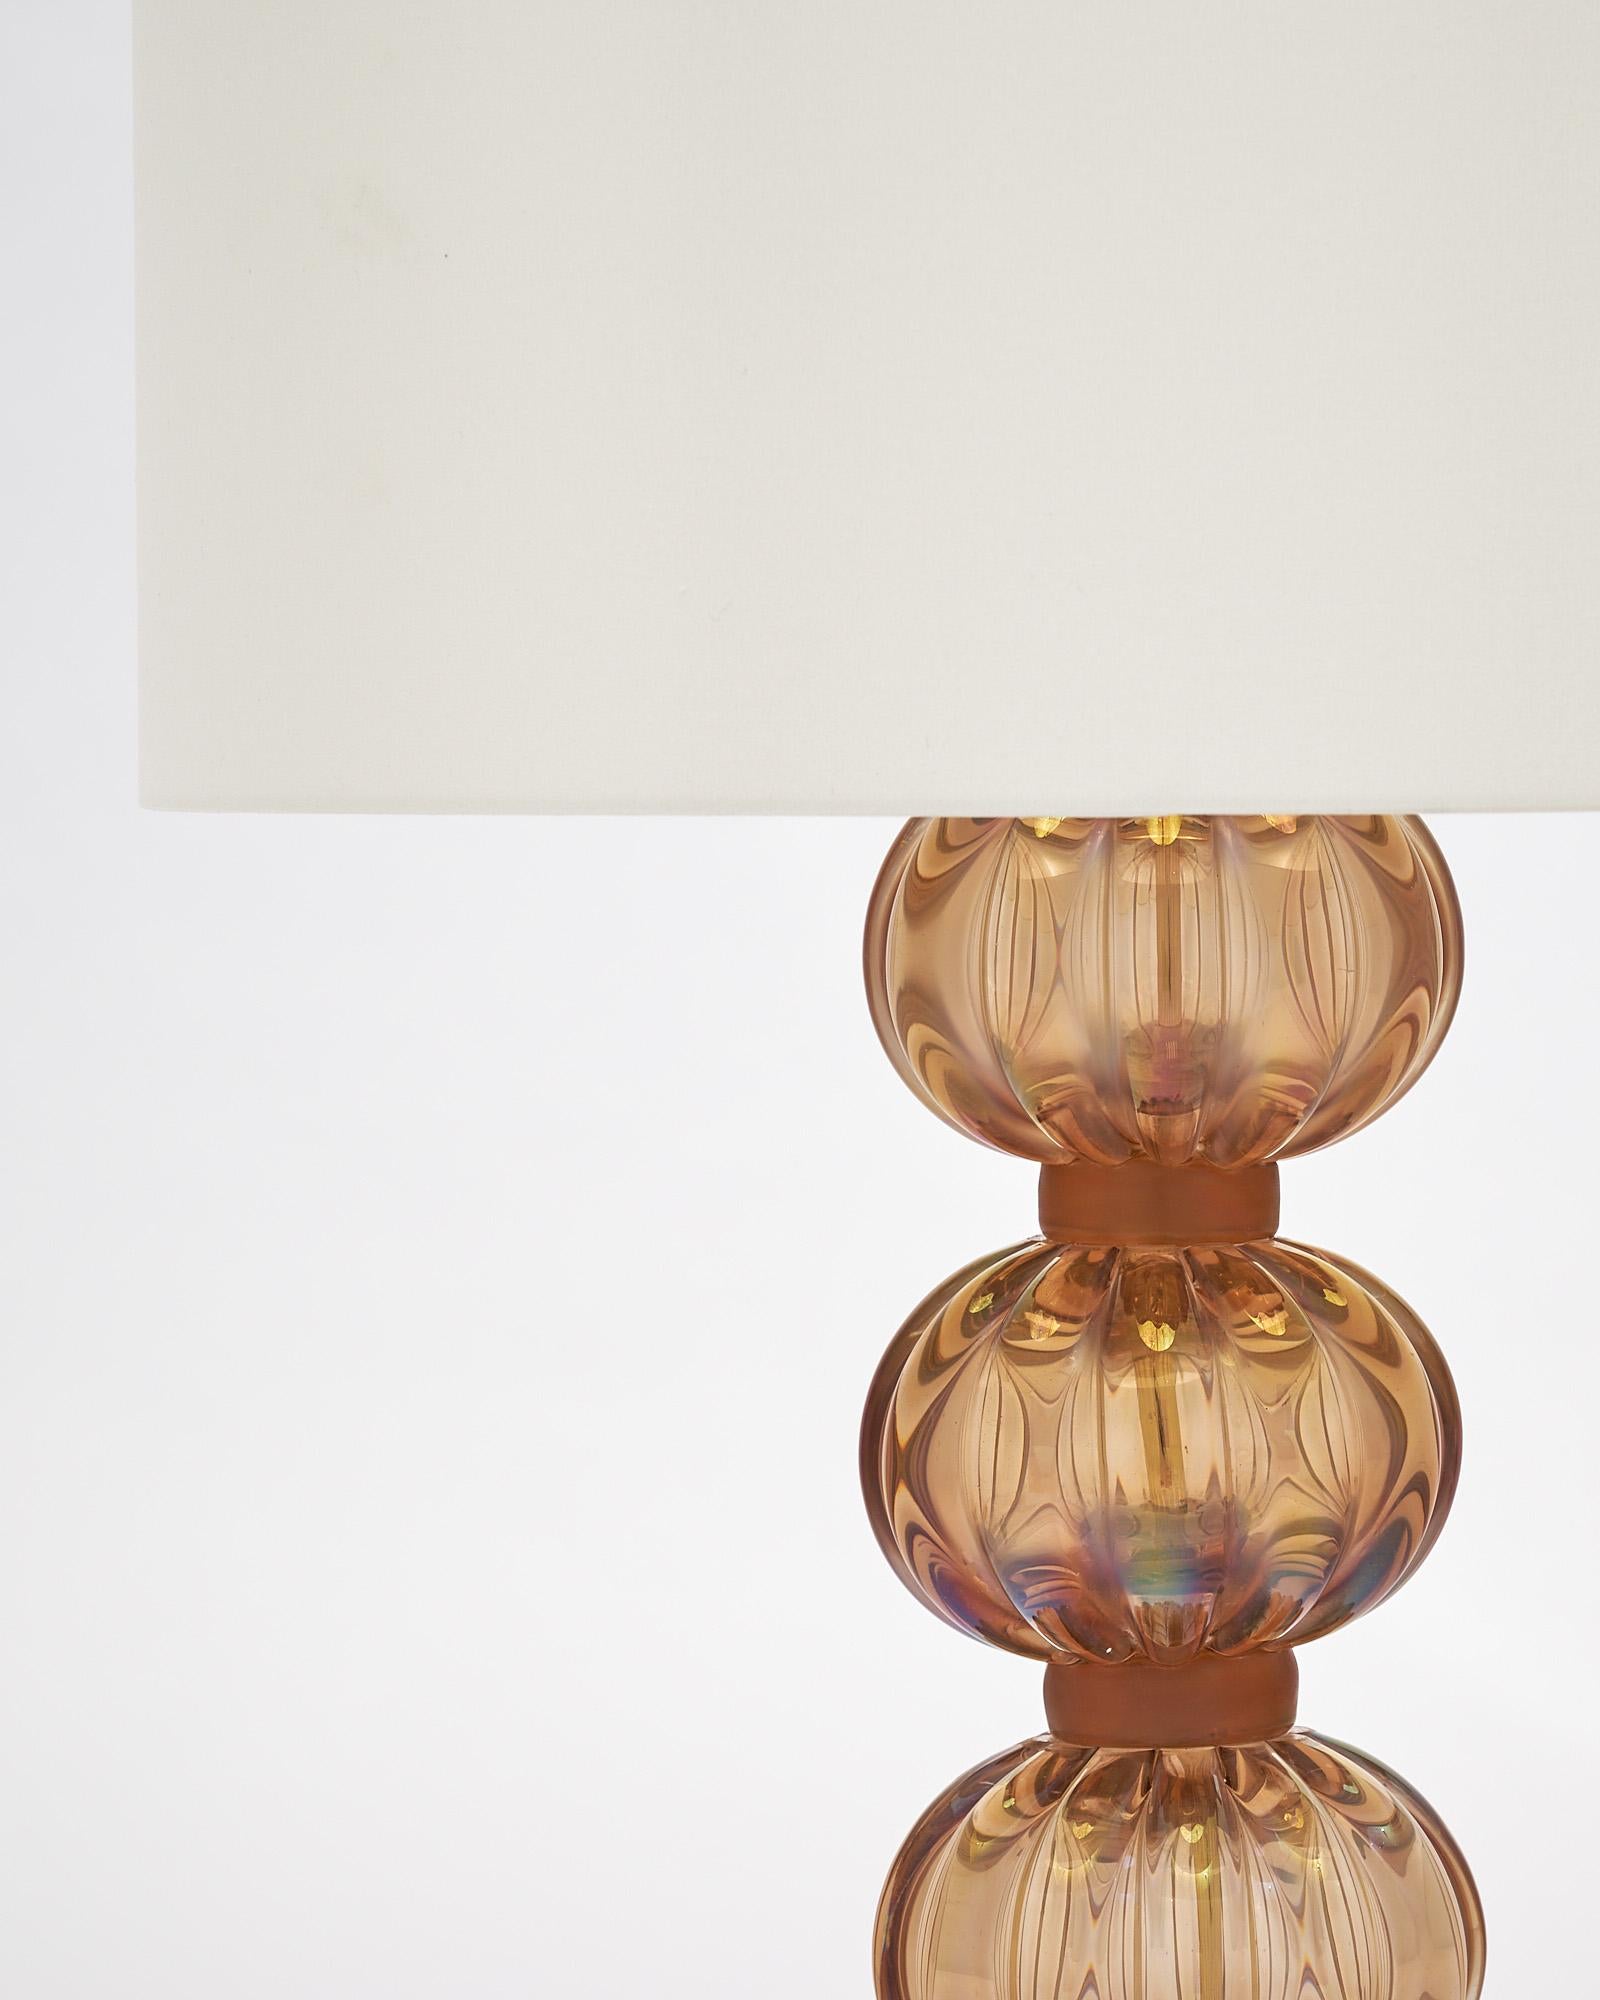 Single lamp from Murano, Italy made of hand-blown iridescent glass in a light smoked topaz color. It has been newly wired to fit US standards. Signed Alberto Dona.